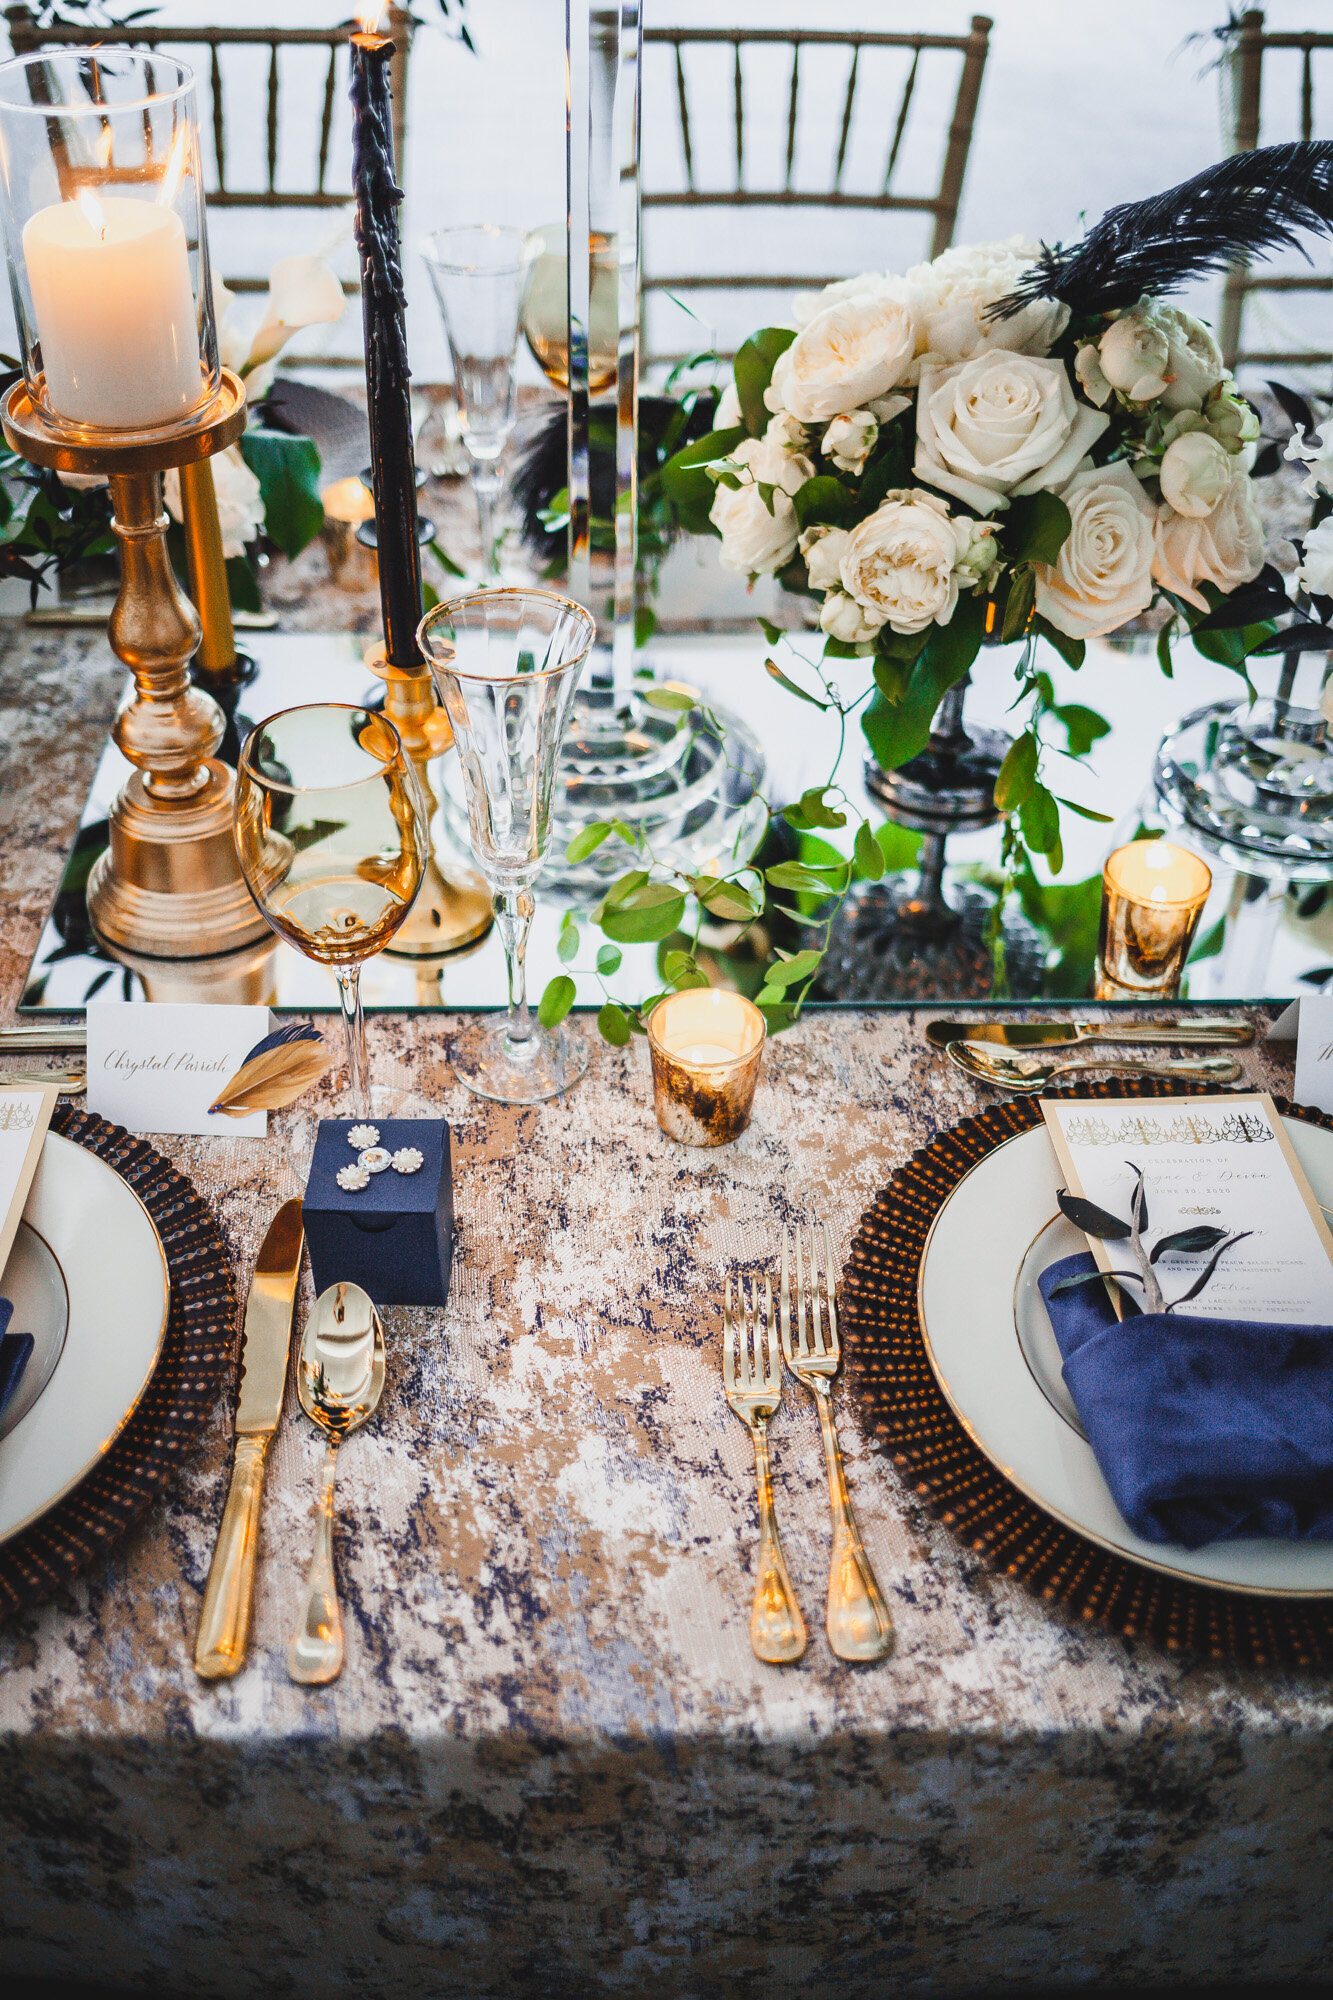 Wedding reception table that has dinnerwares, glasses, candles and floral centerpieces